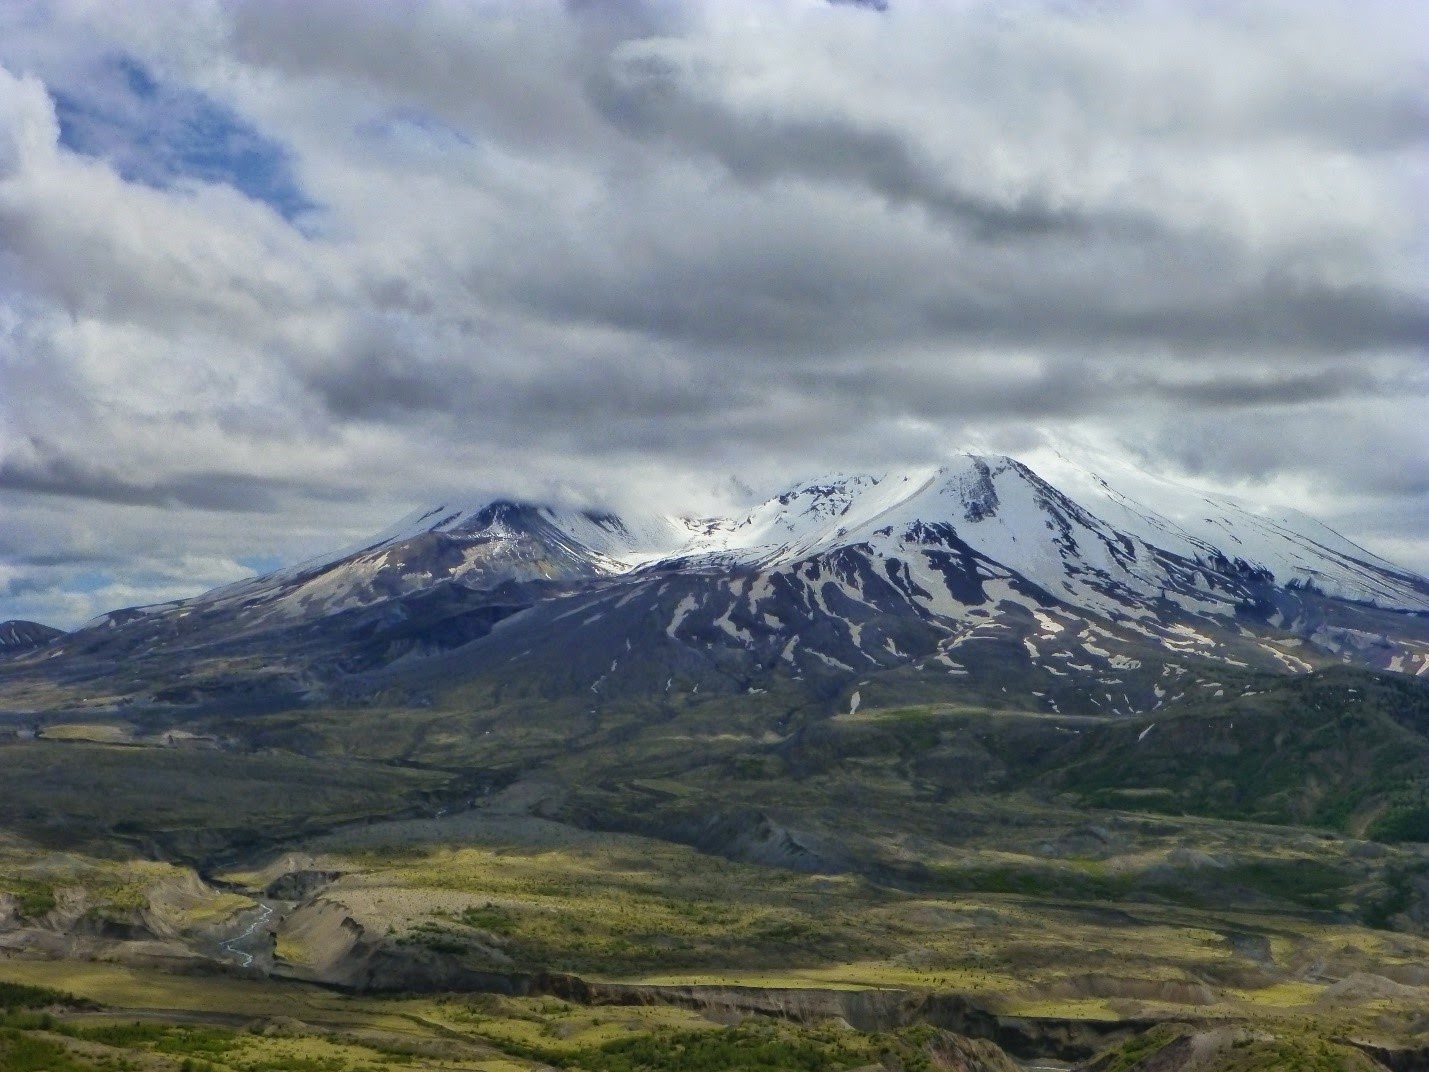 Remembering the Mount Saint Helens 1980 eruption: 35 years later